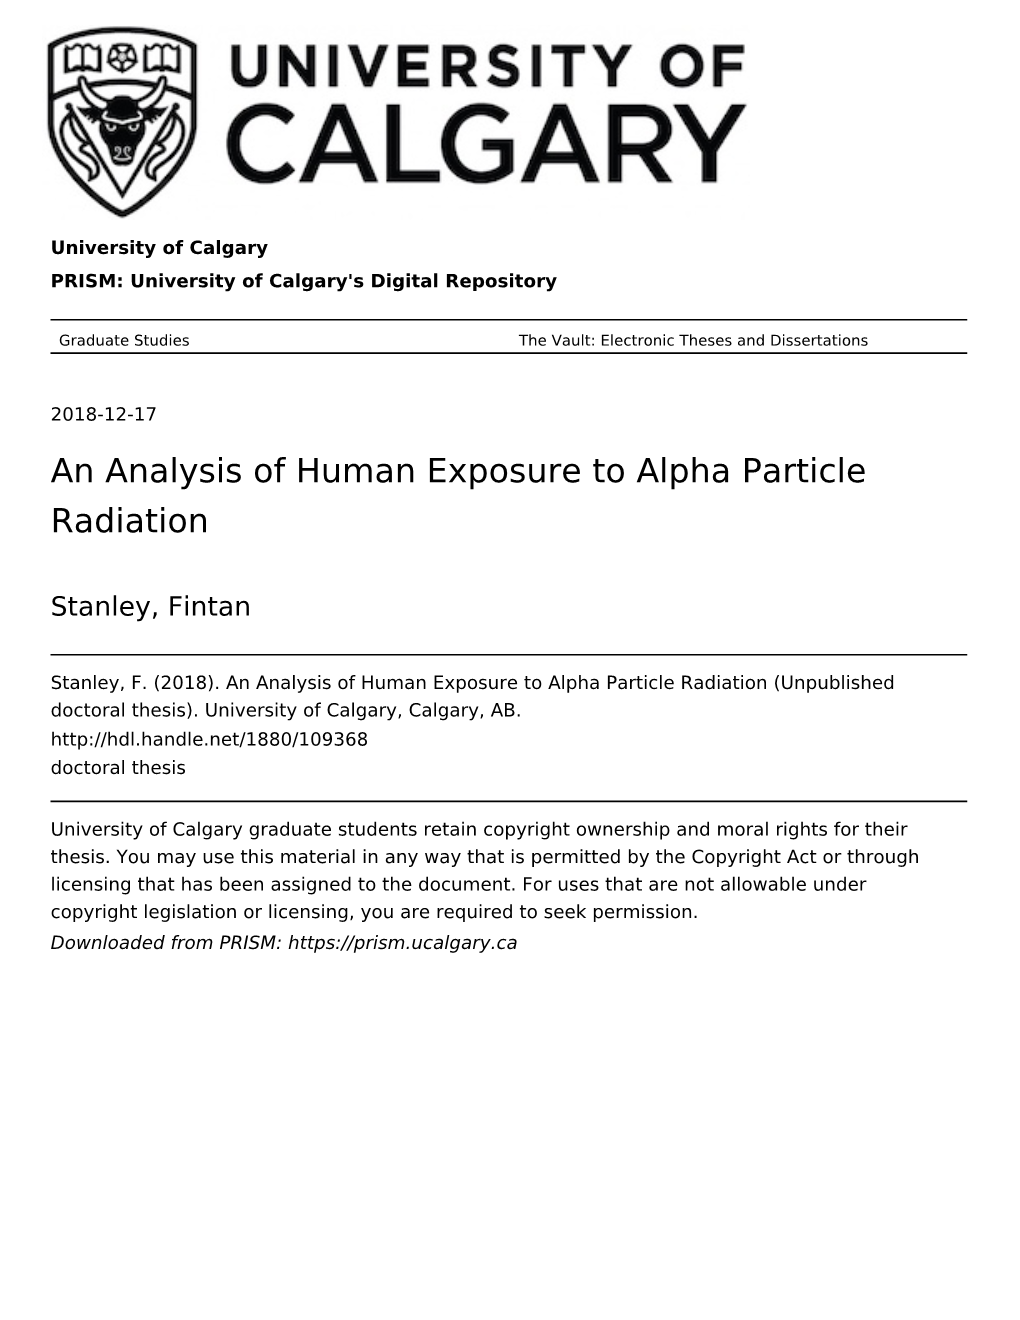 An Analysis of Human Exposure to Alpha Particle Radiation